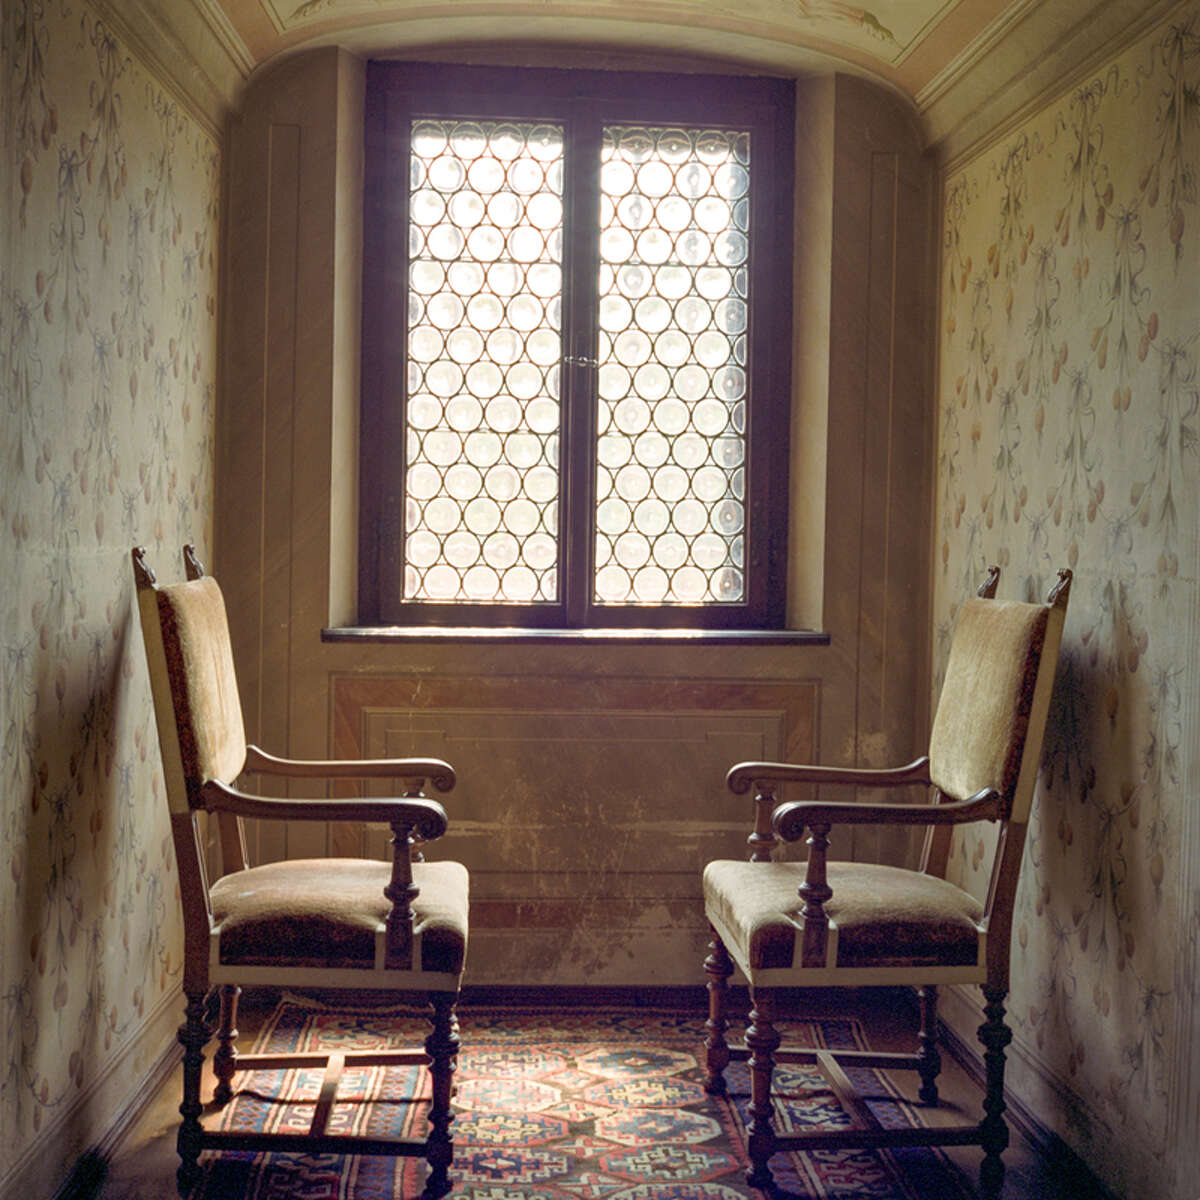 Dale Goffigon, "Two Chairs," archival pigment print on cotton rag paper (Carrie Haddad Gallery)